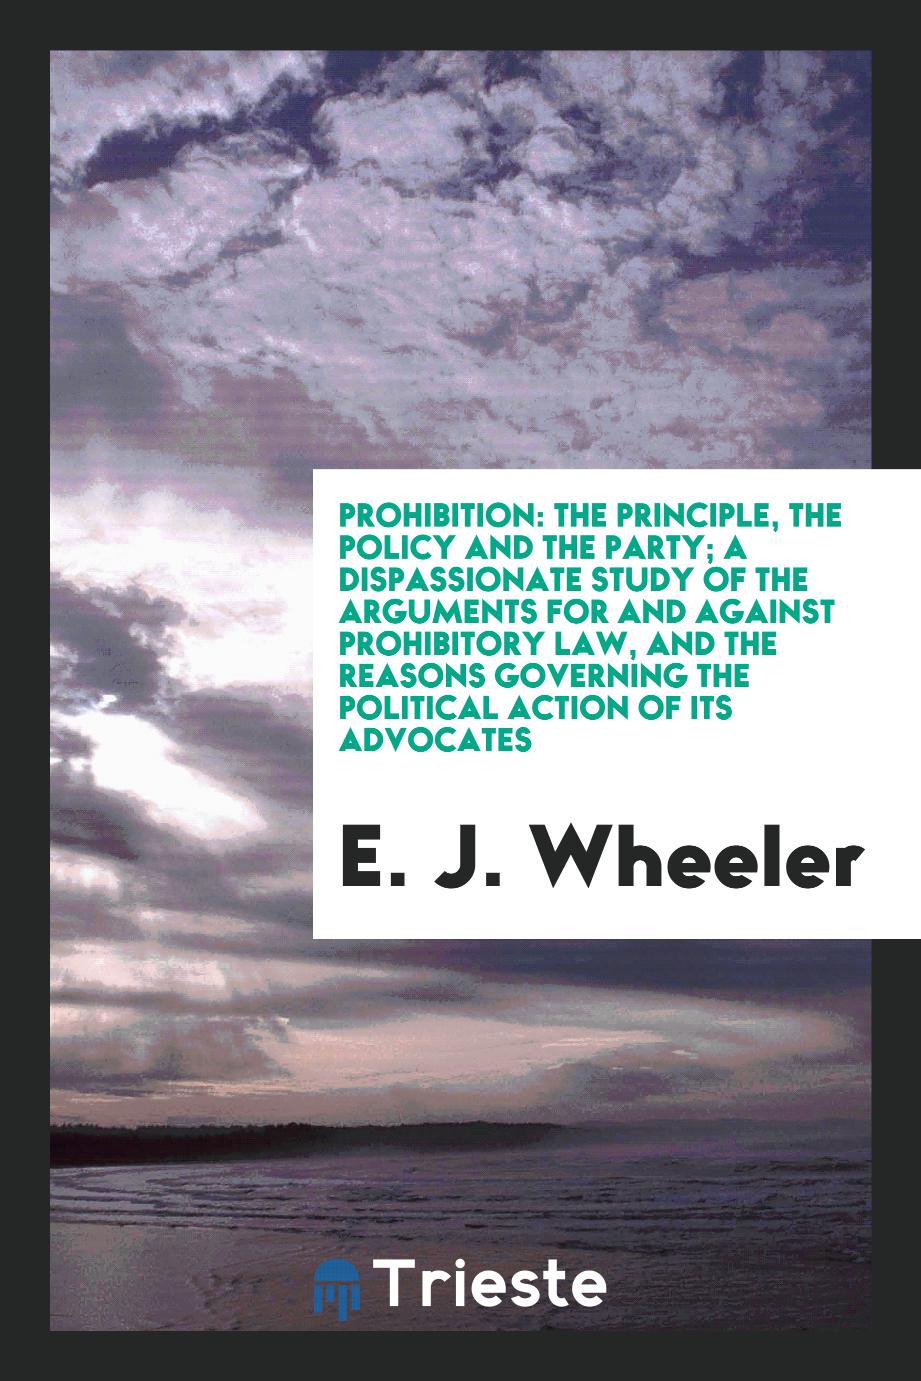 Prohibition: the principle, the policy and the party; a dispassionate study of the arguments for and against prohibitory law, and the reasons governing the political action of its advocates